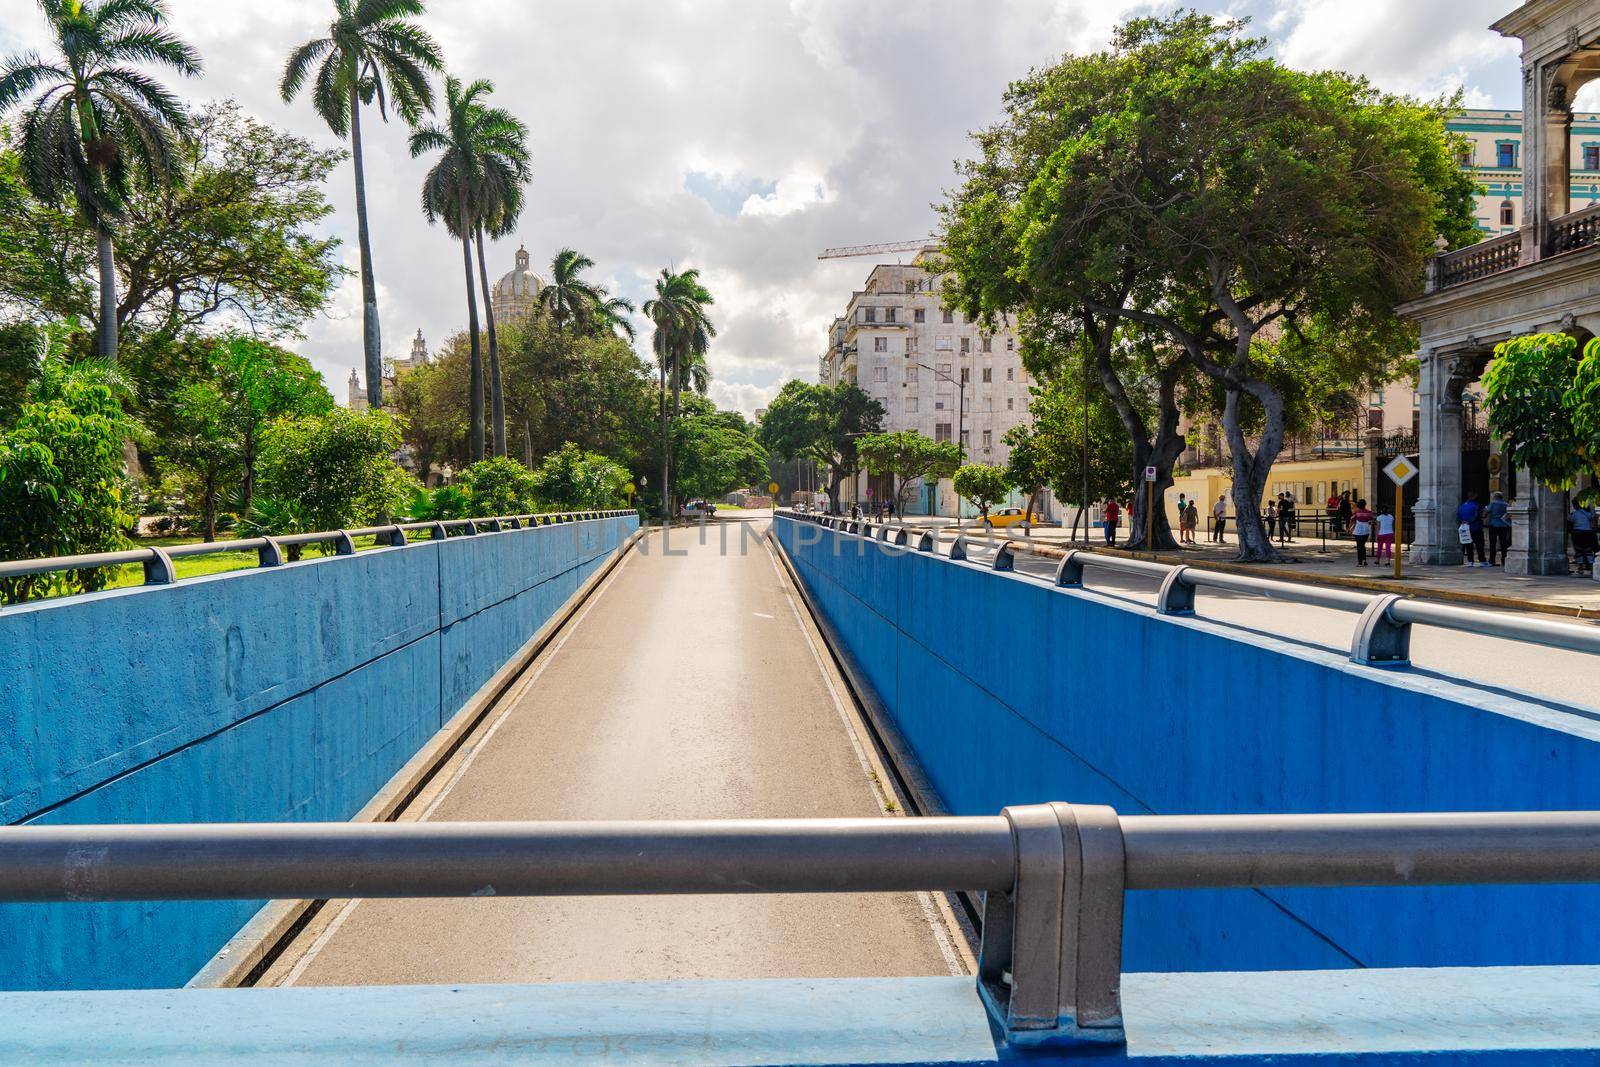 Havana Cuba. November 25, 2020: One of the exits of the tunnel of the bay of Havana